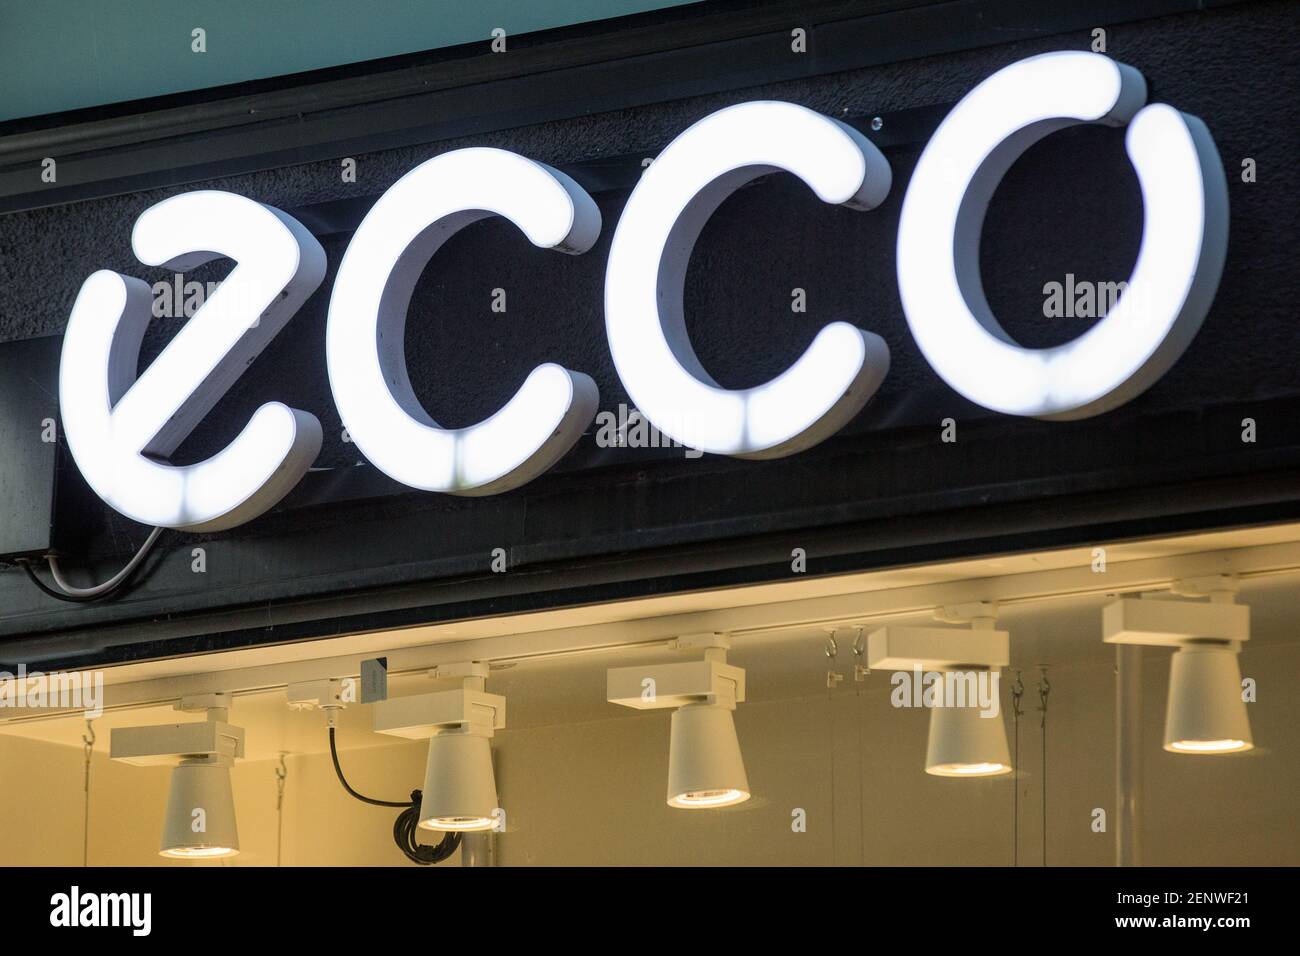 Danish manufacturer and retailer founded in 1963 Karl Toosbuy, Ecco logo seen in (Photo Karol Serewis / SOPA Images/Sipa USA Stock Photo - Alamy